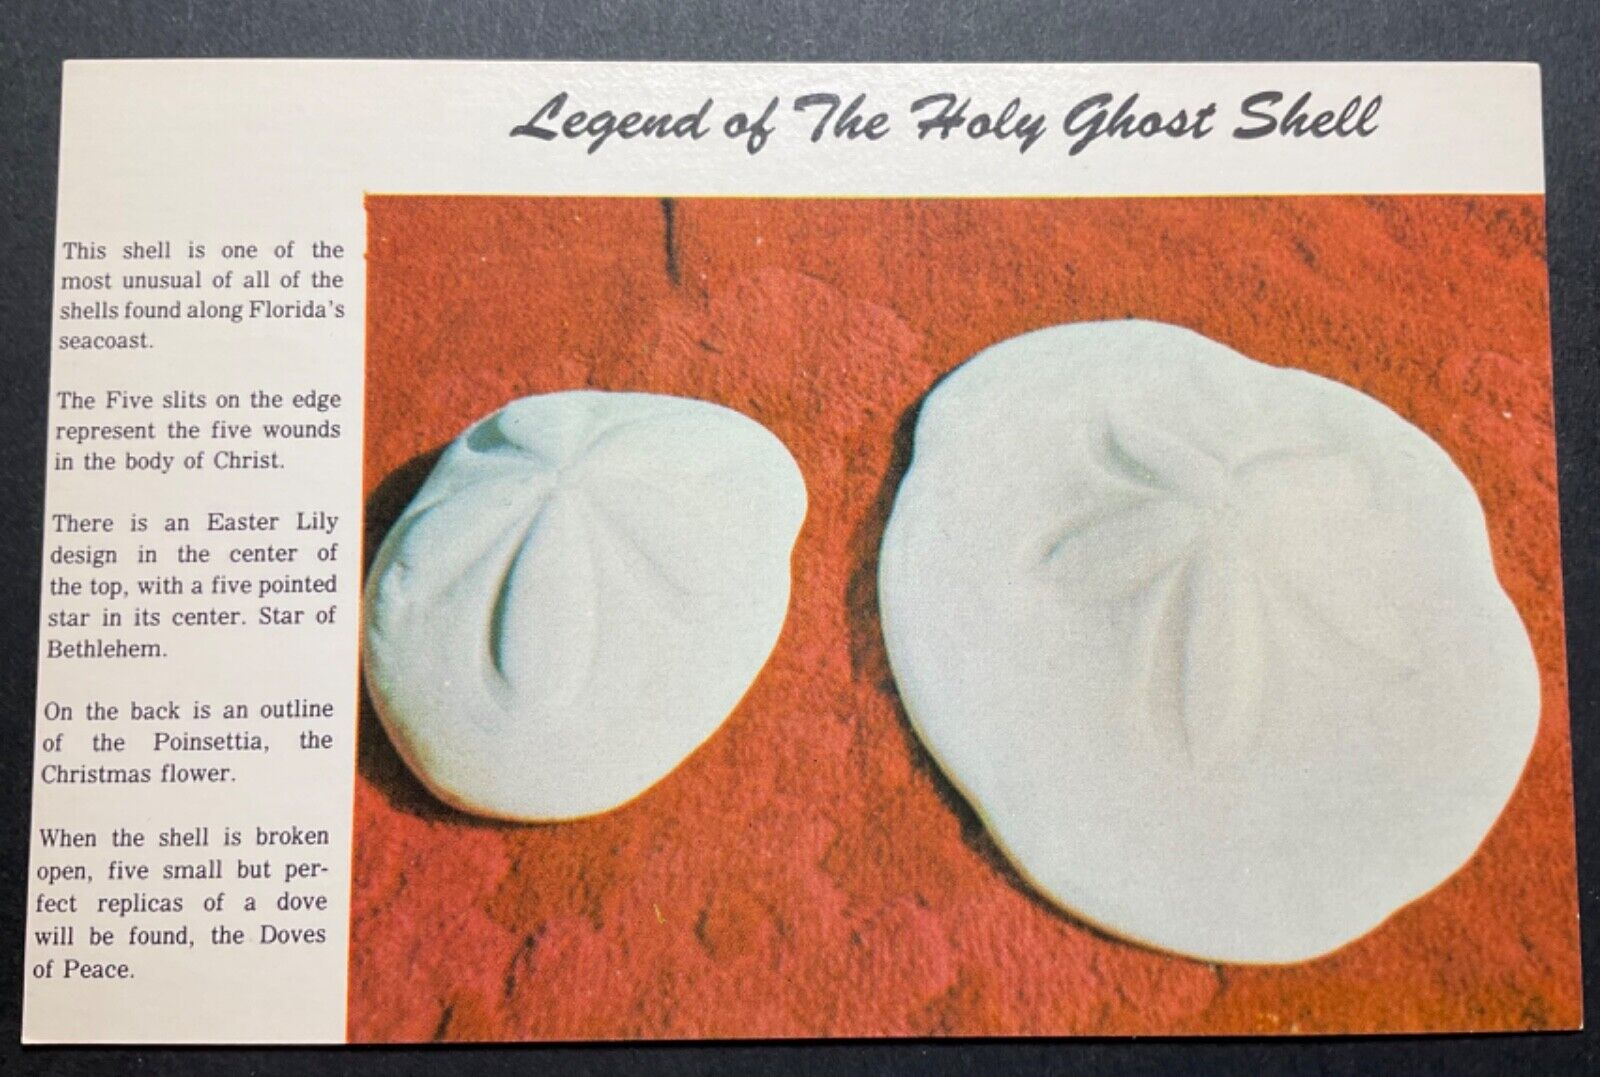 Florida FL Postcard The Sand Dollar Shell Found in great numbers Coast